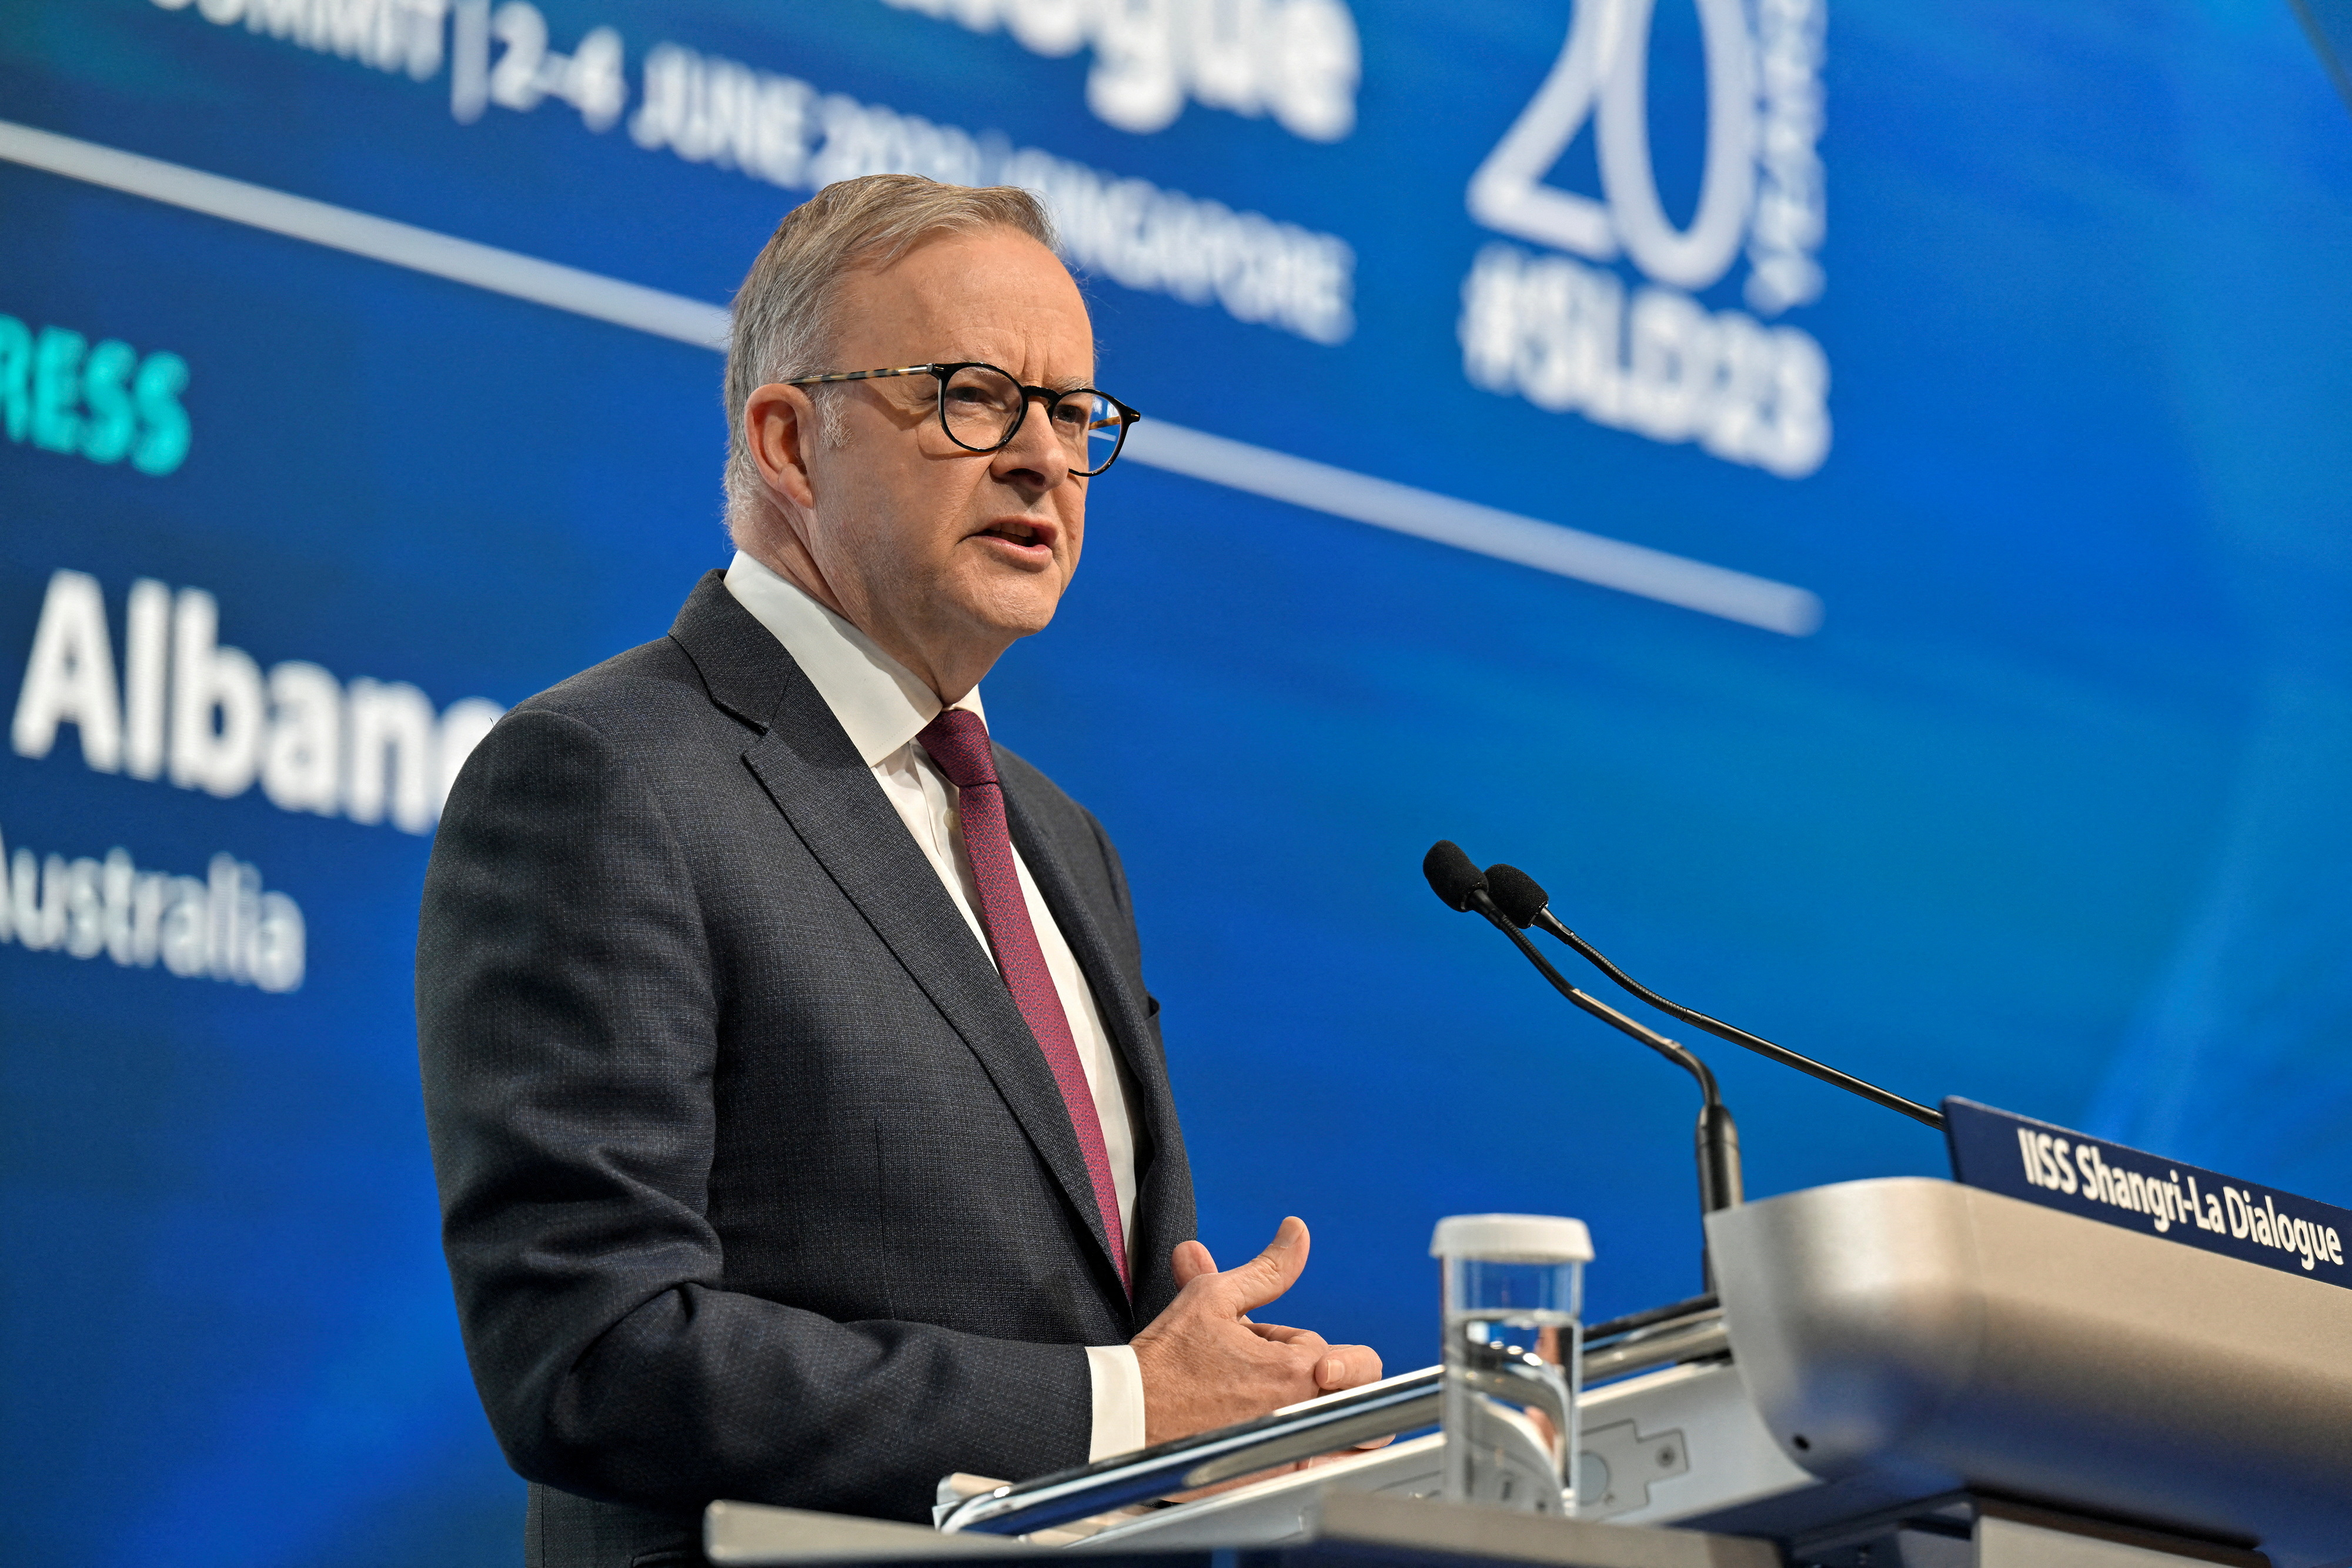 Australia's Prime Minister Anthony Albanese gives the keynote address for the 20th IISS Shangri-La Dialogue in Singapore